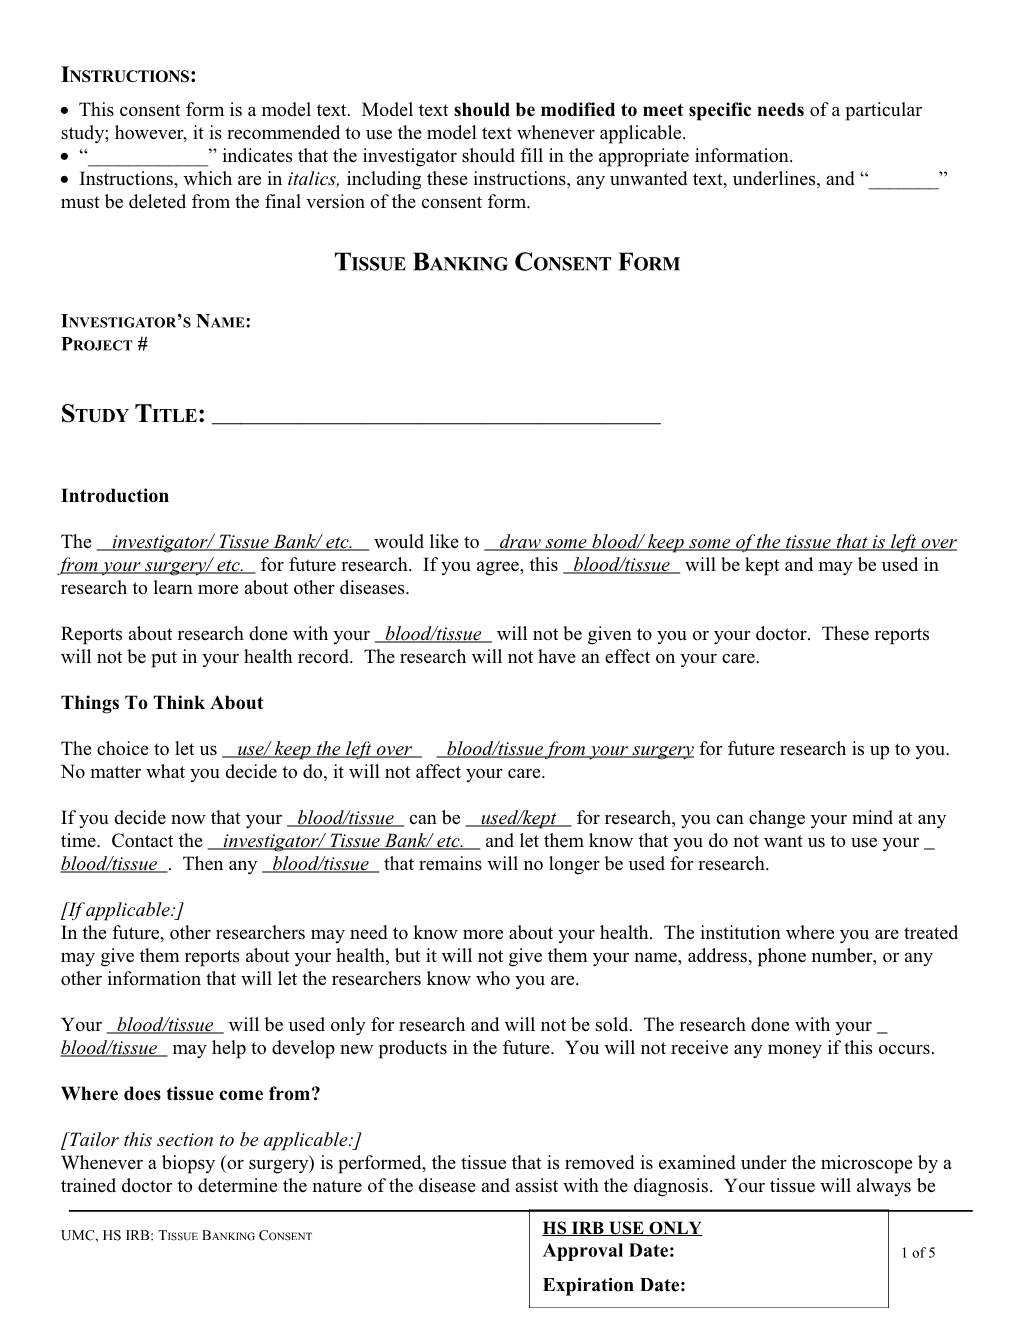 Tissue Banking Consent Form